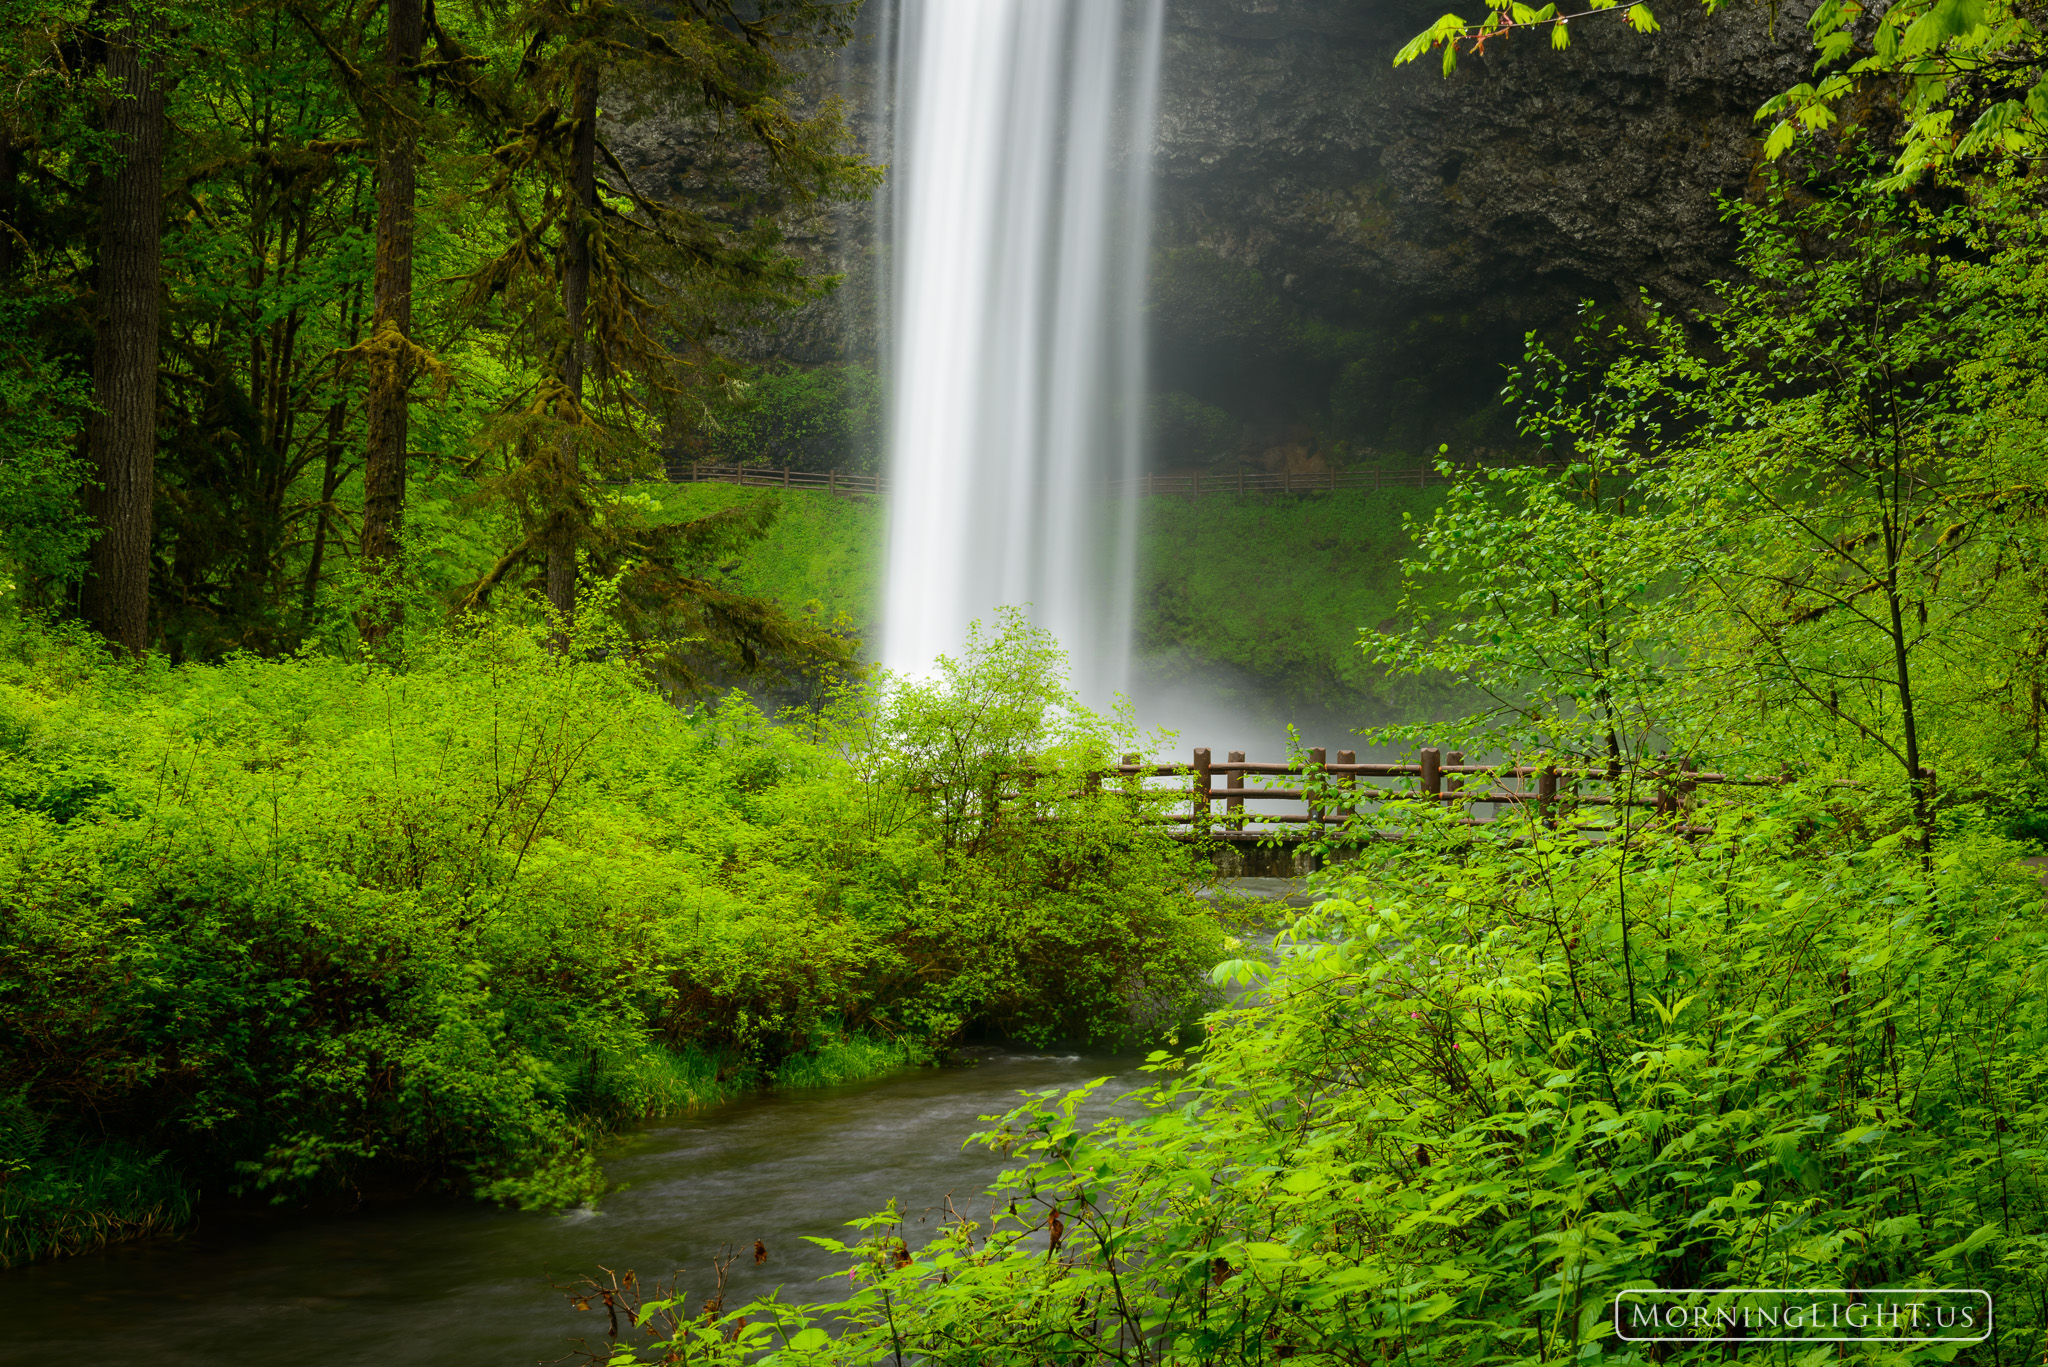 A waterfall comes out of the sky beside a small bridge in a lush Oregon forest.